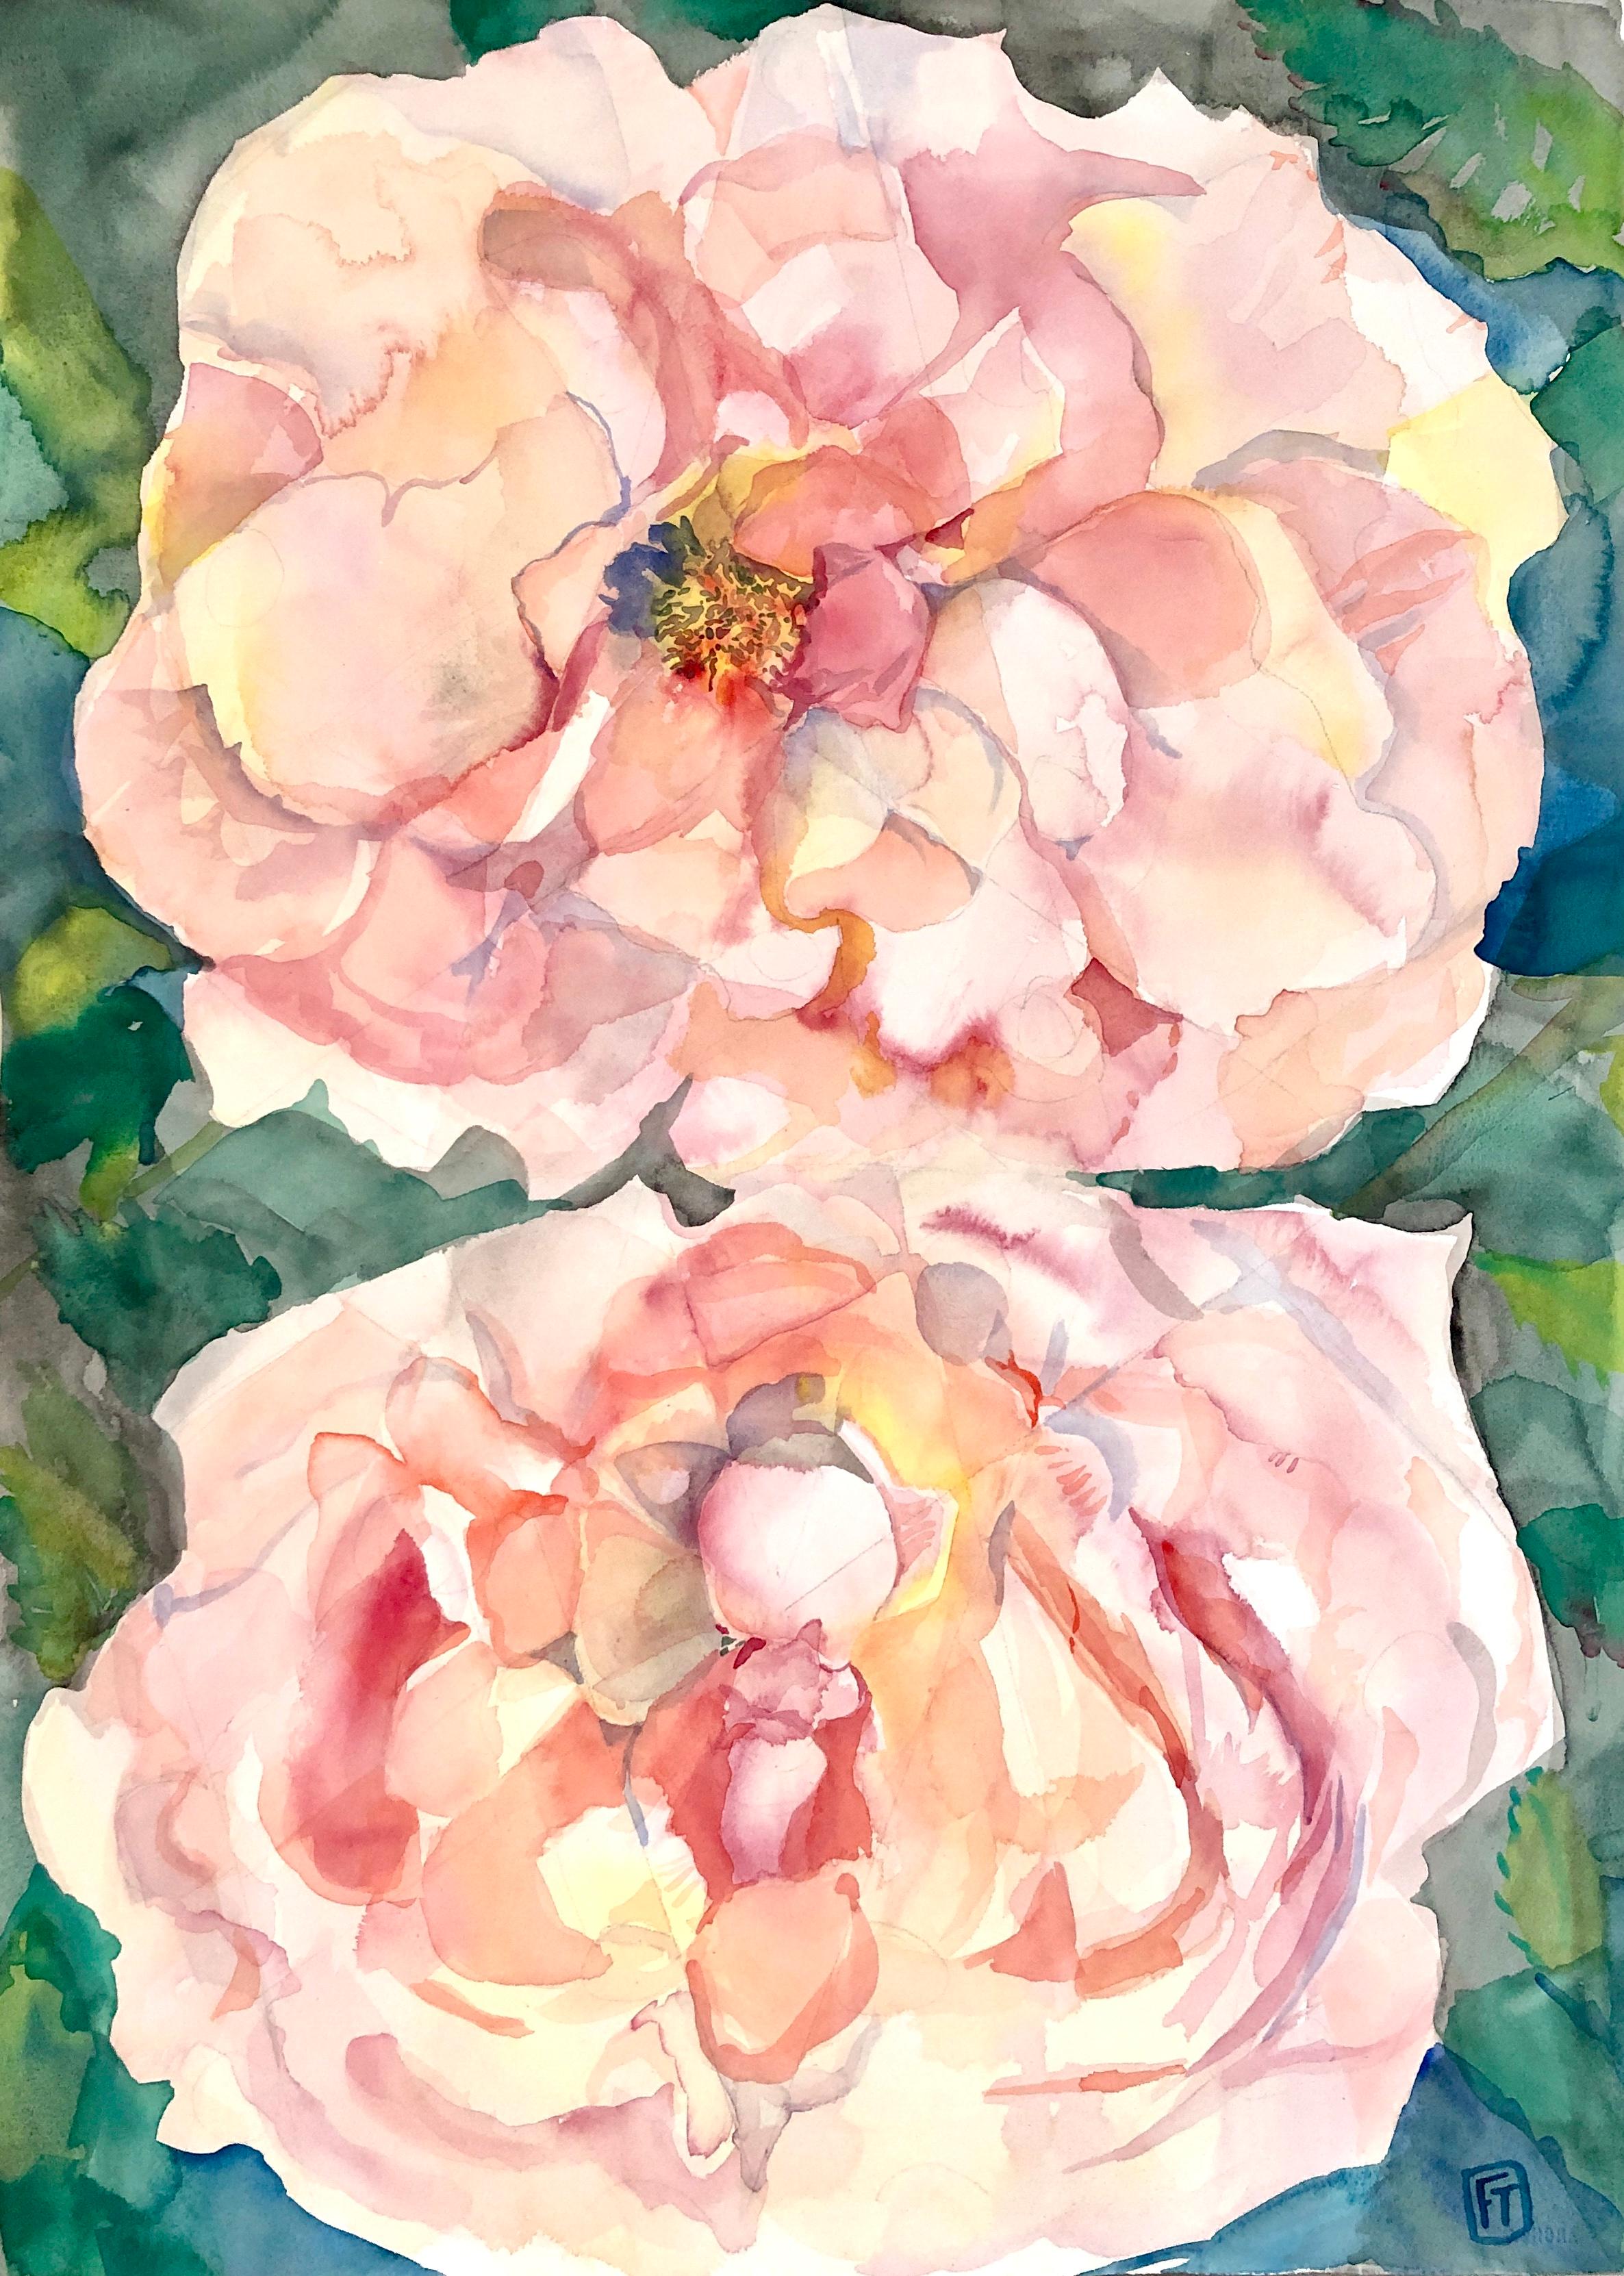 "TWO ROSES", watercolor, flowers, petals, rose, pink, green leaves, beauty, love